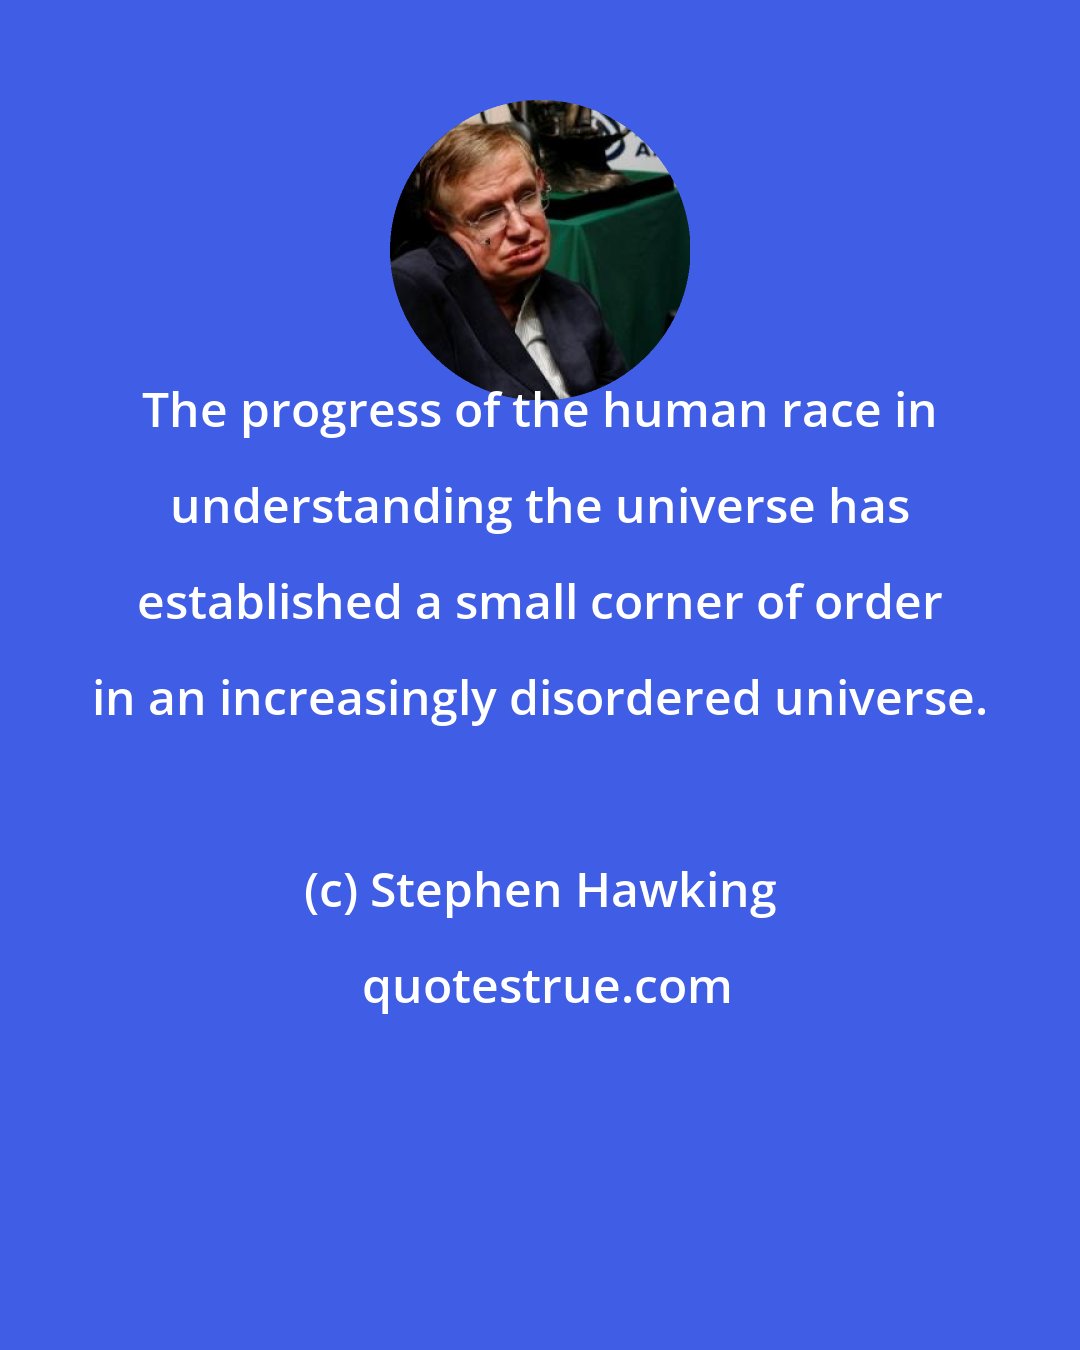 Stephen Hawking: The progress of the human race in understanding the universe has established a small corner of order in an increasingly disordered universe.